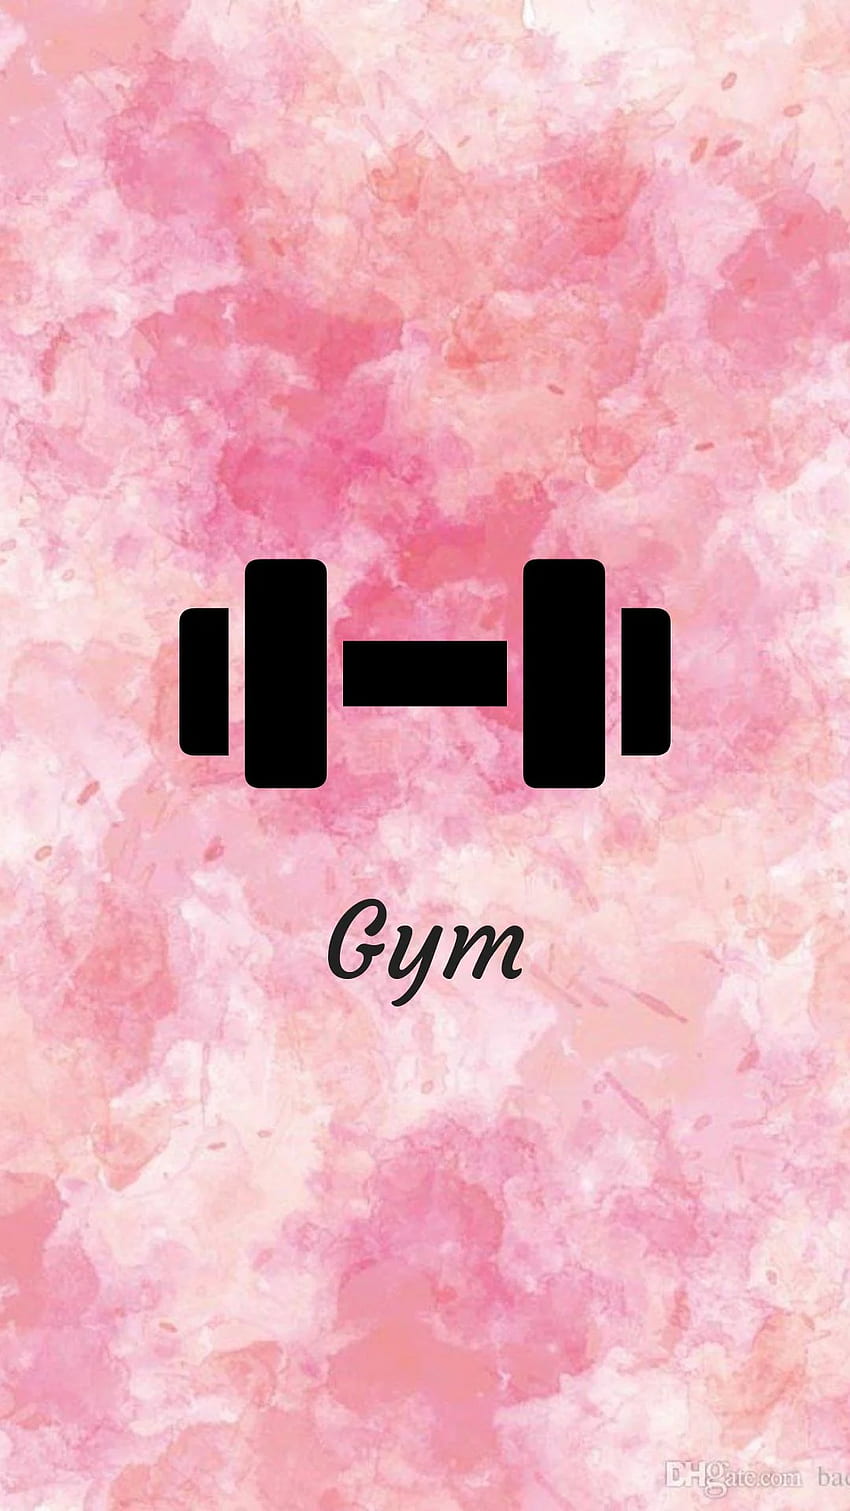 Background for Instagram highlight (gym). Fitness , Instagram background, Fitness iphone, Cute Gymnastics HD phone wallpaper